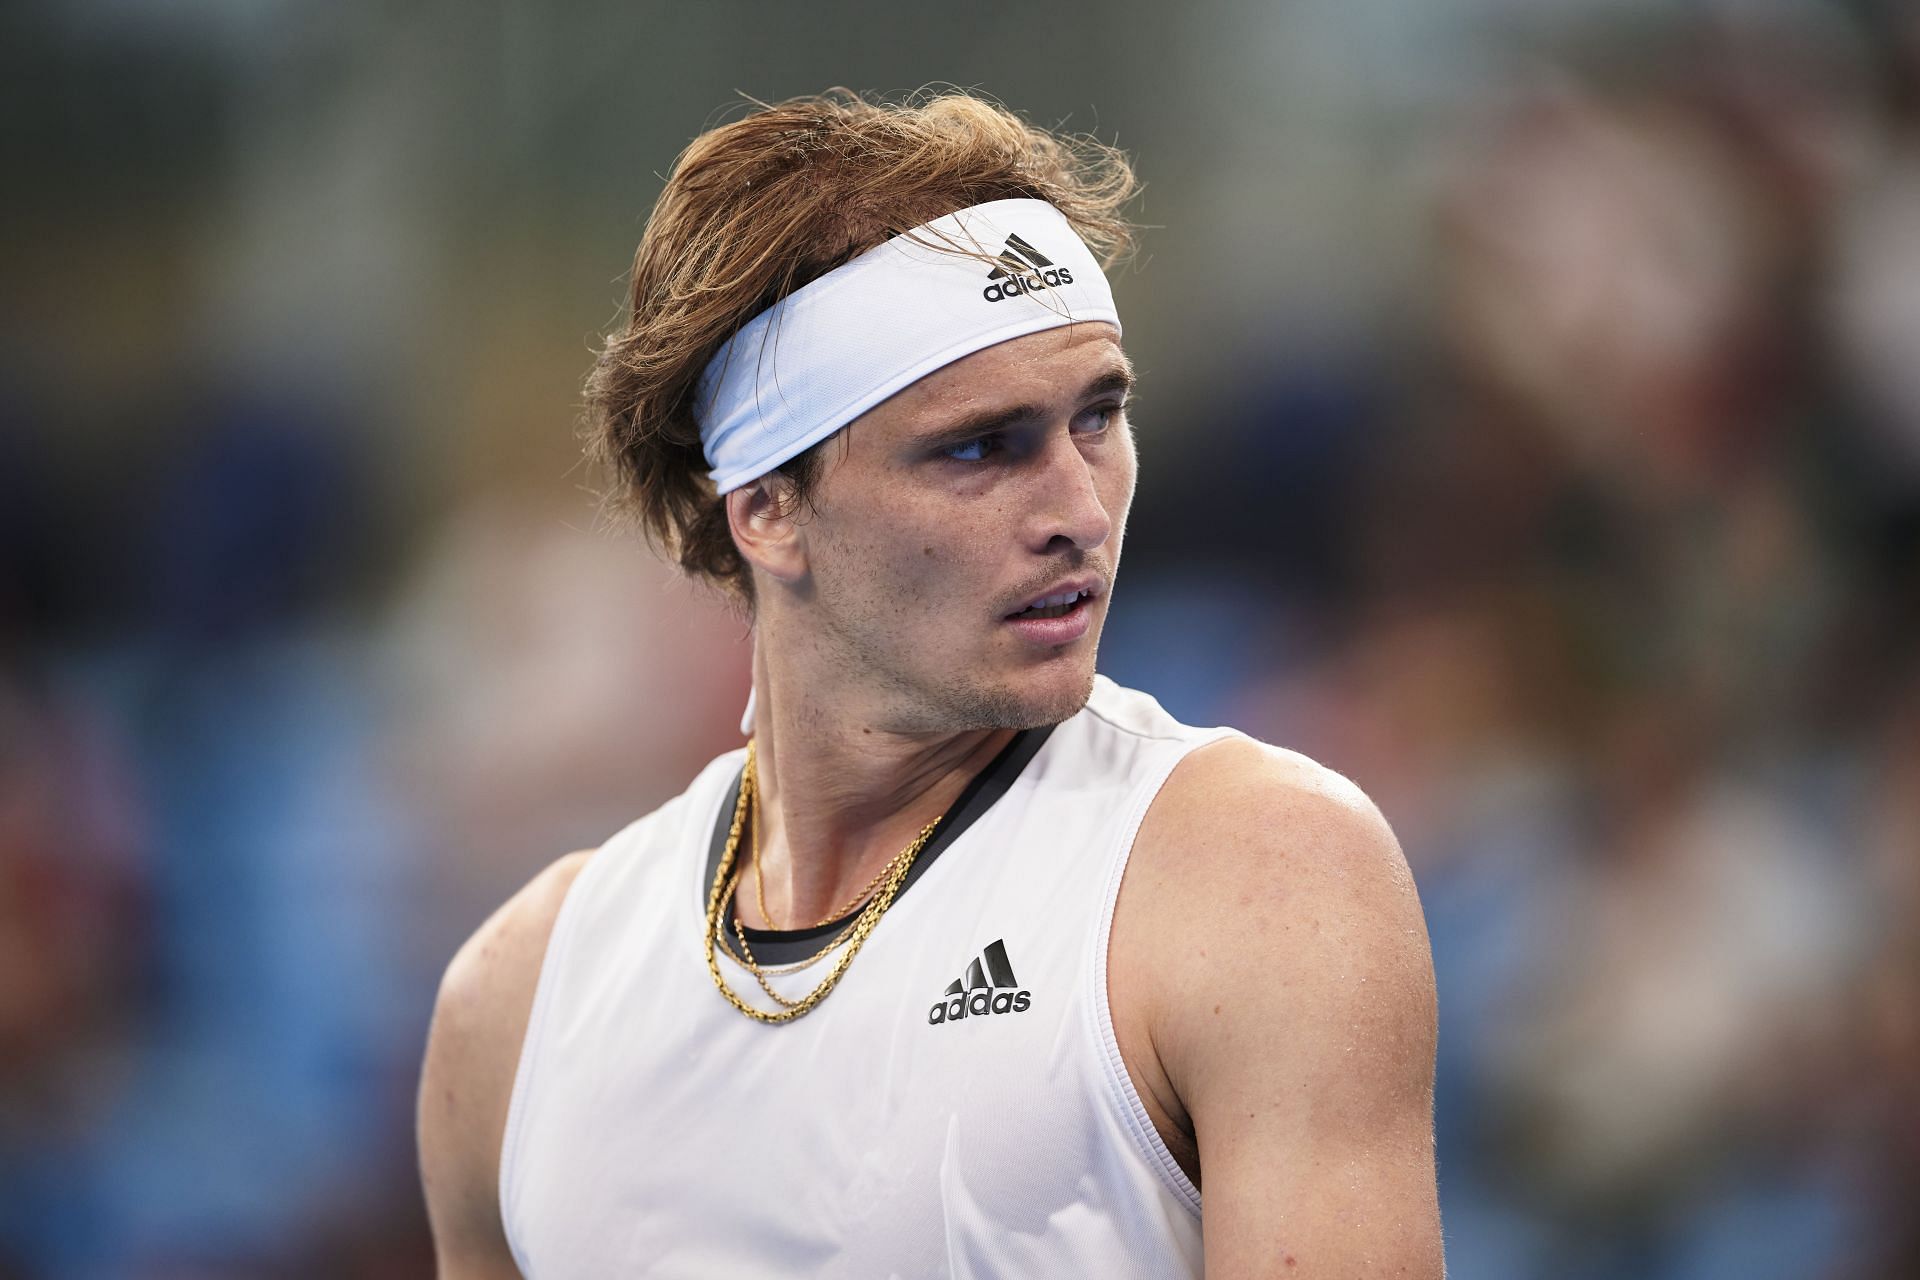 Alexander Zverev said the allegations were &quot;unfounded.&quot;